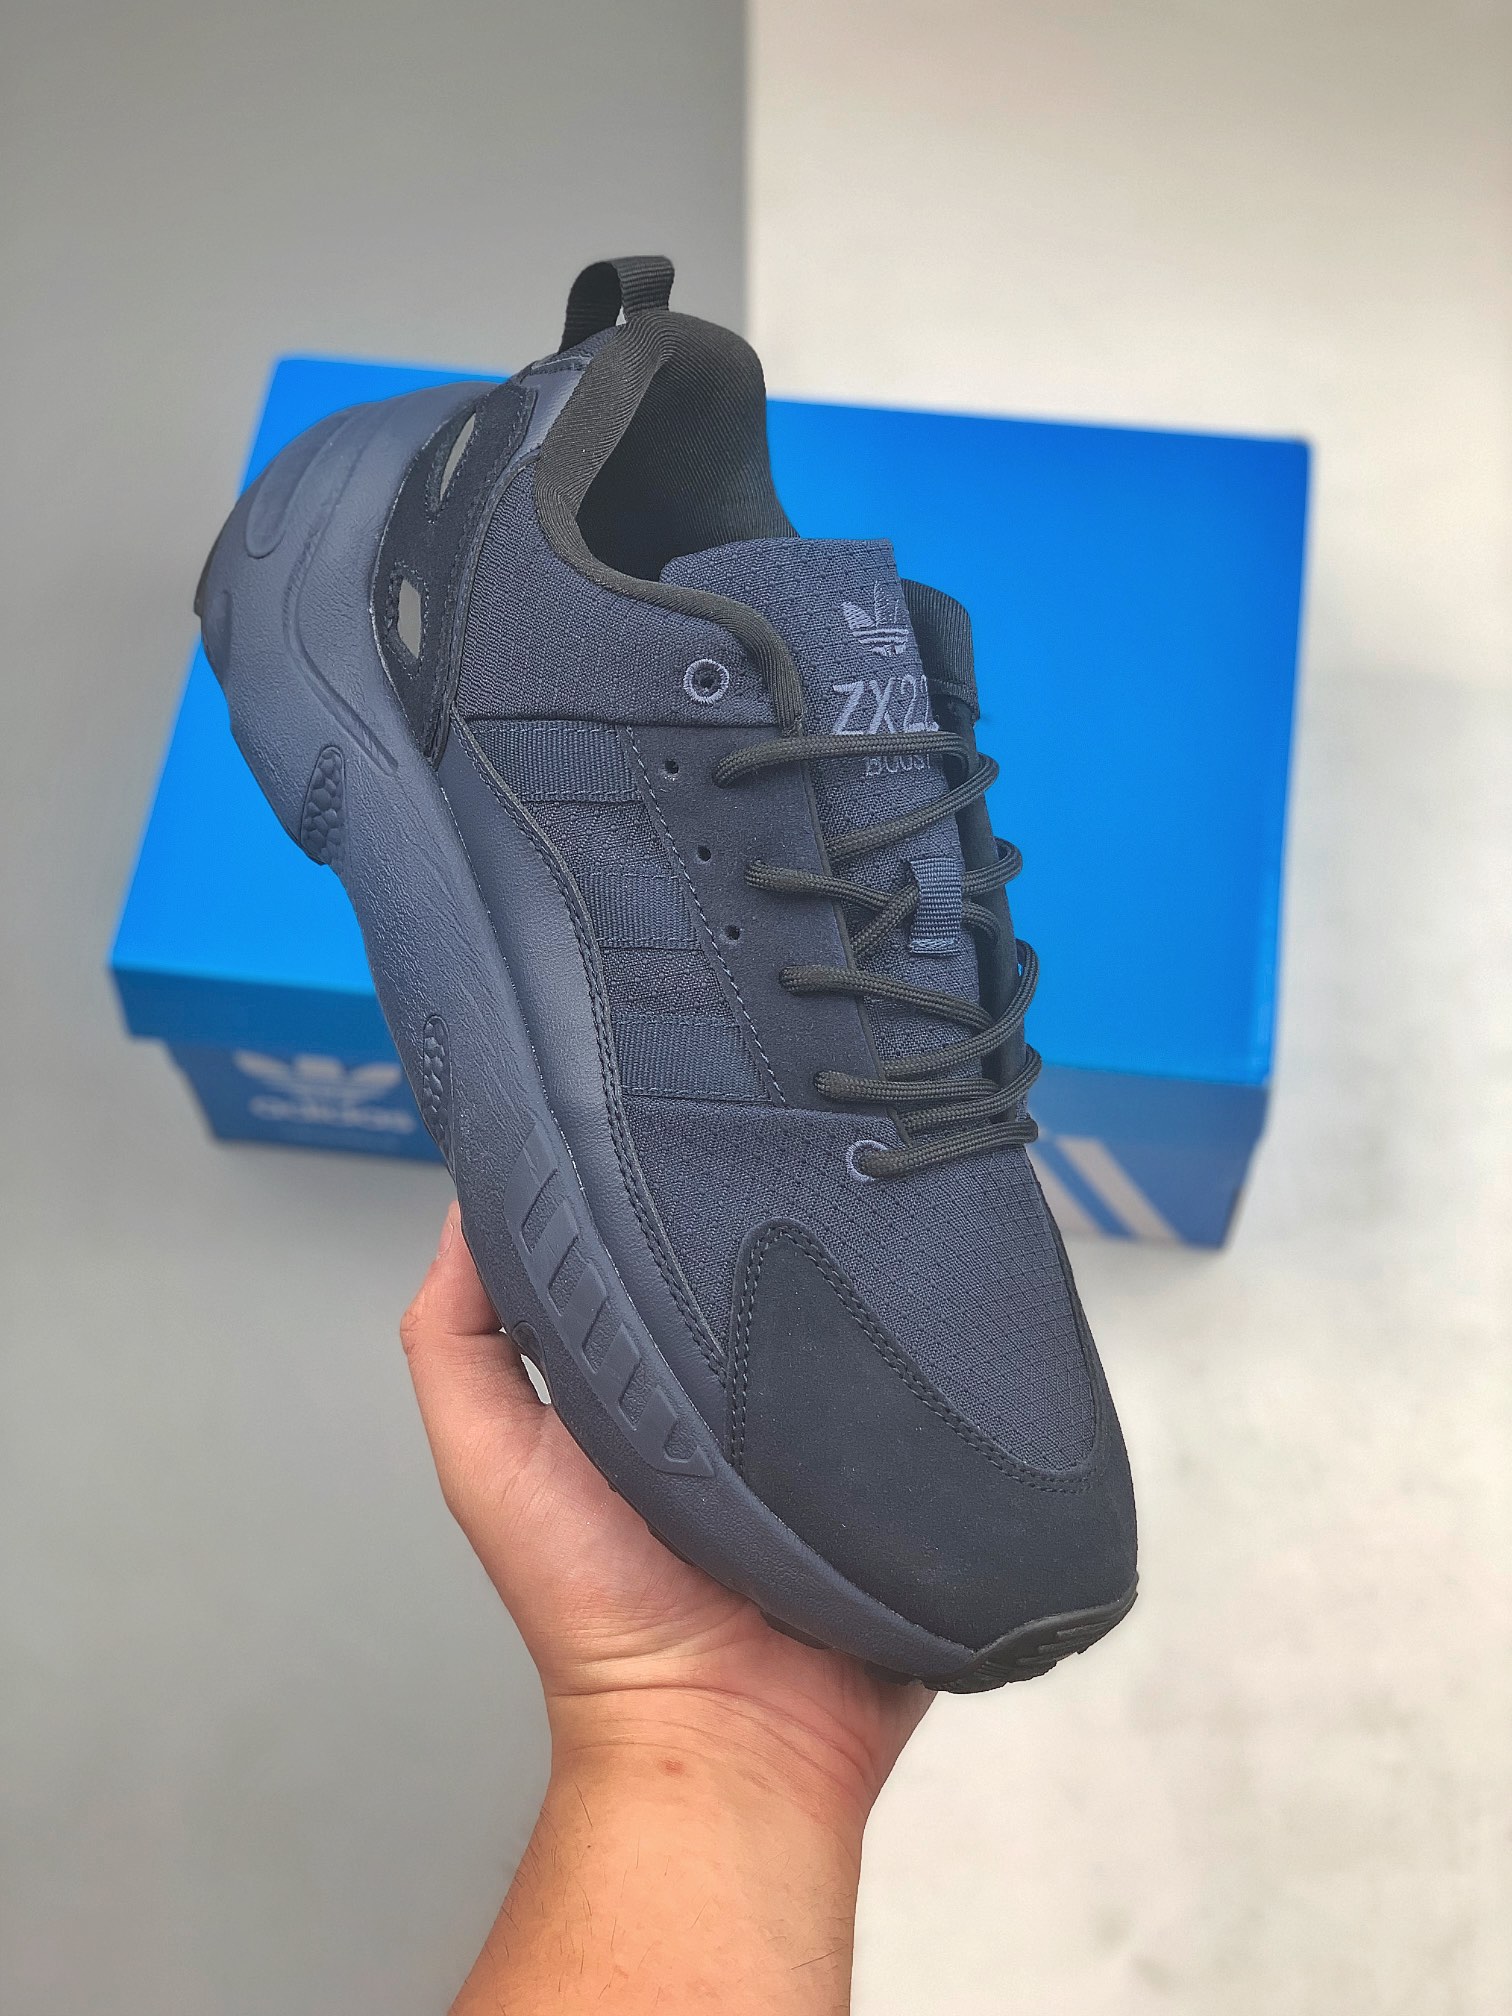 Adidas ZX 22 Boost Shadow Navy GY6711 - Latest Release 2022